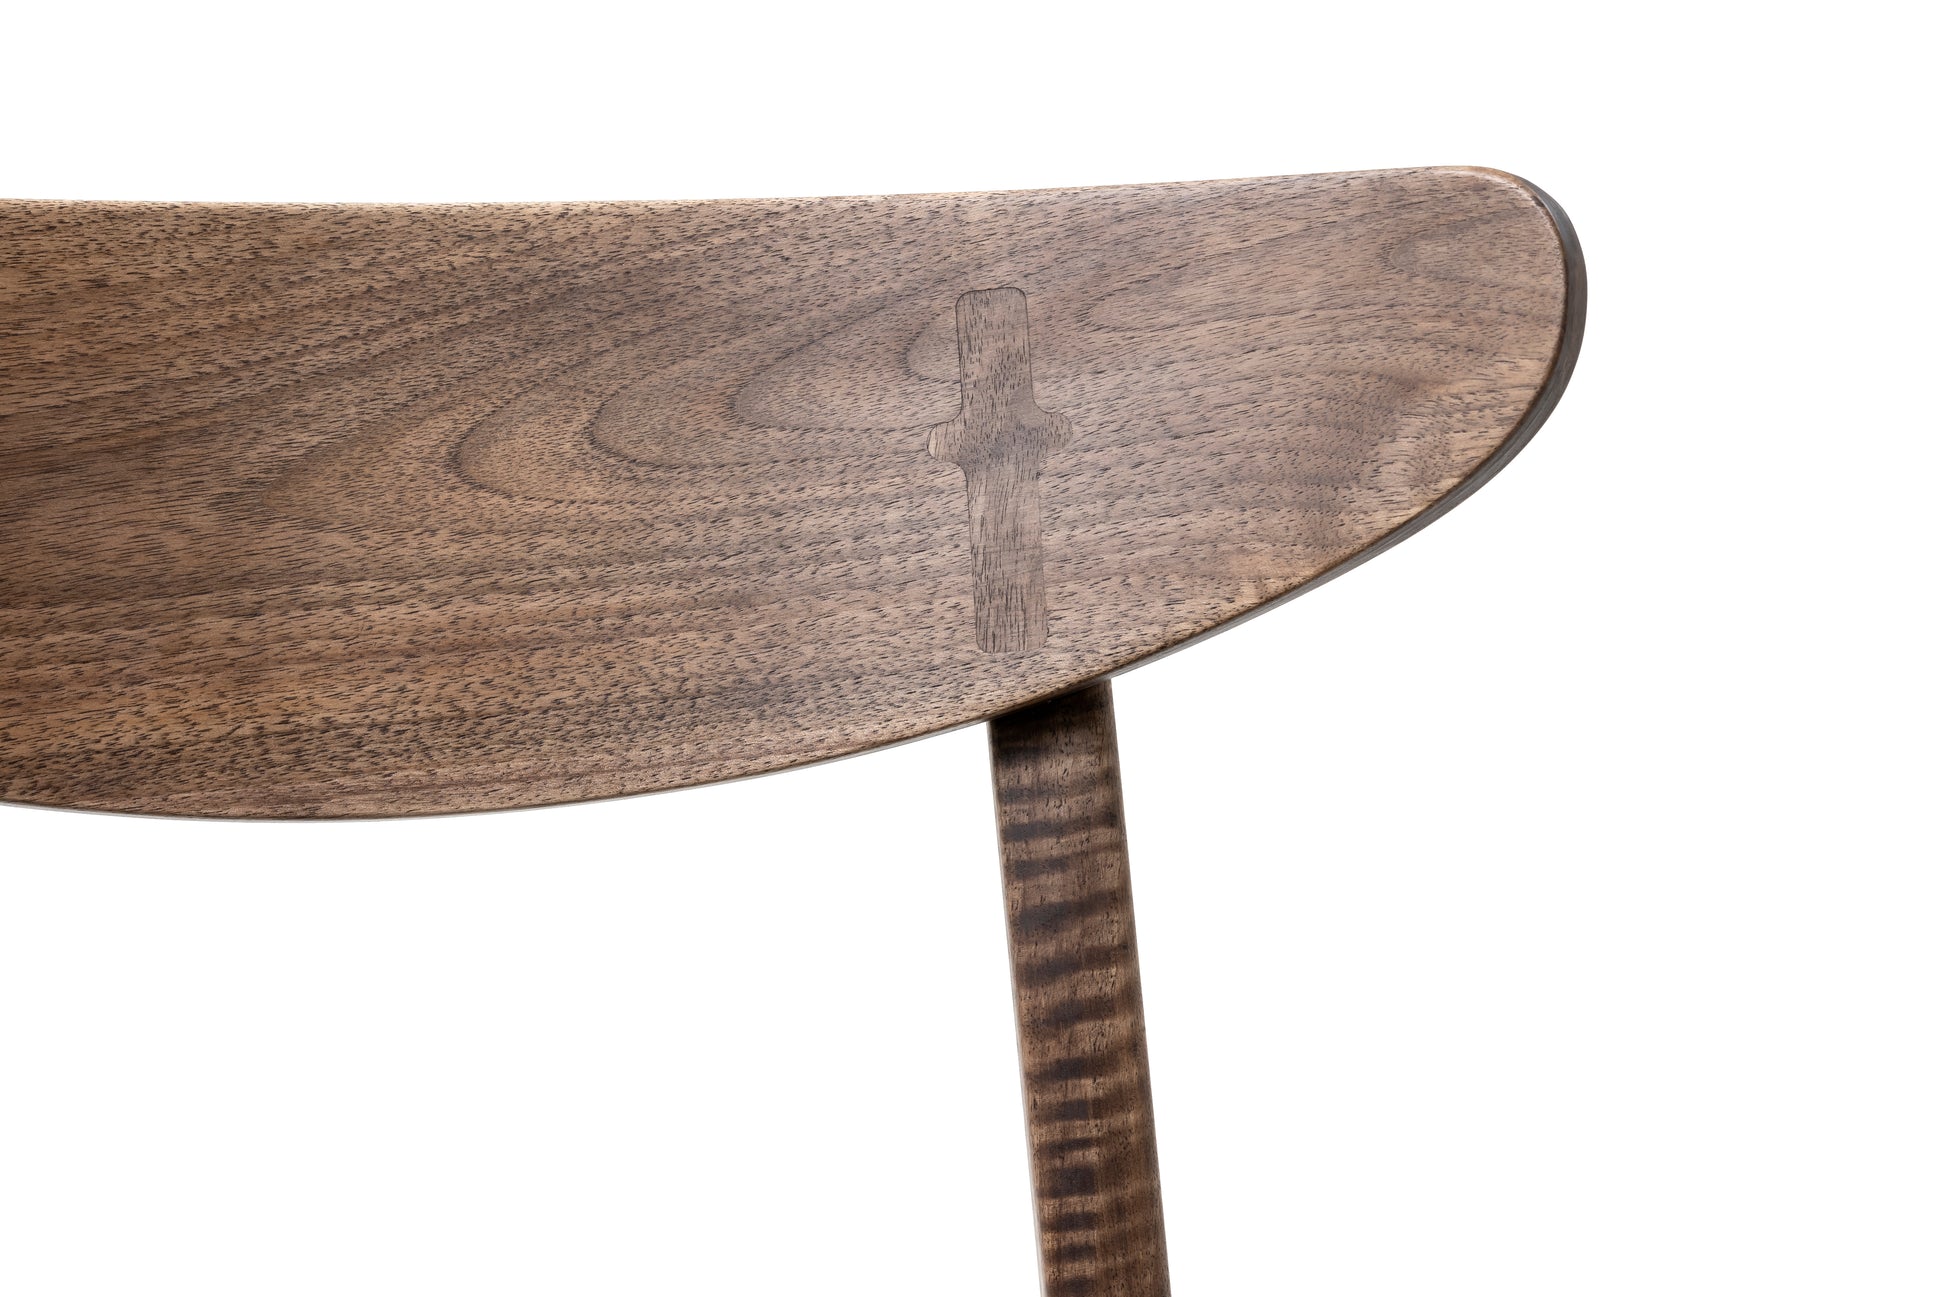 Walnut Dining Chair - S10Home